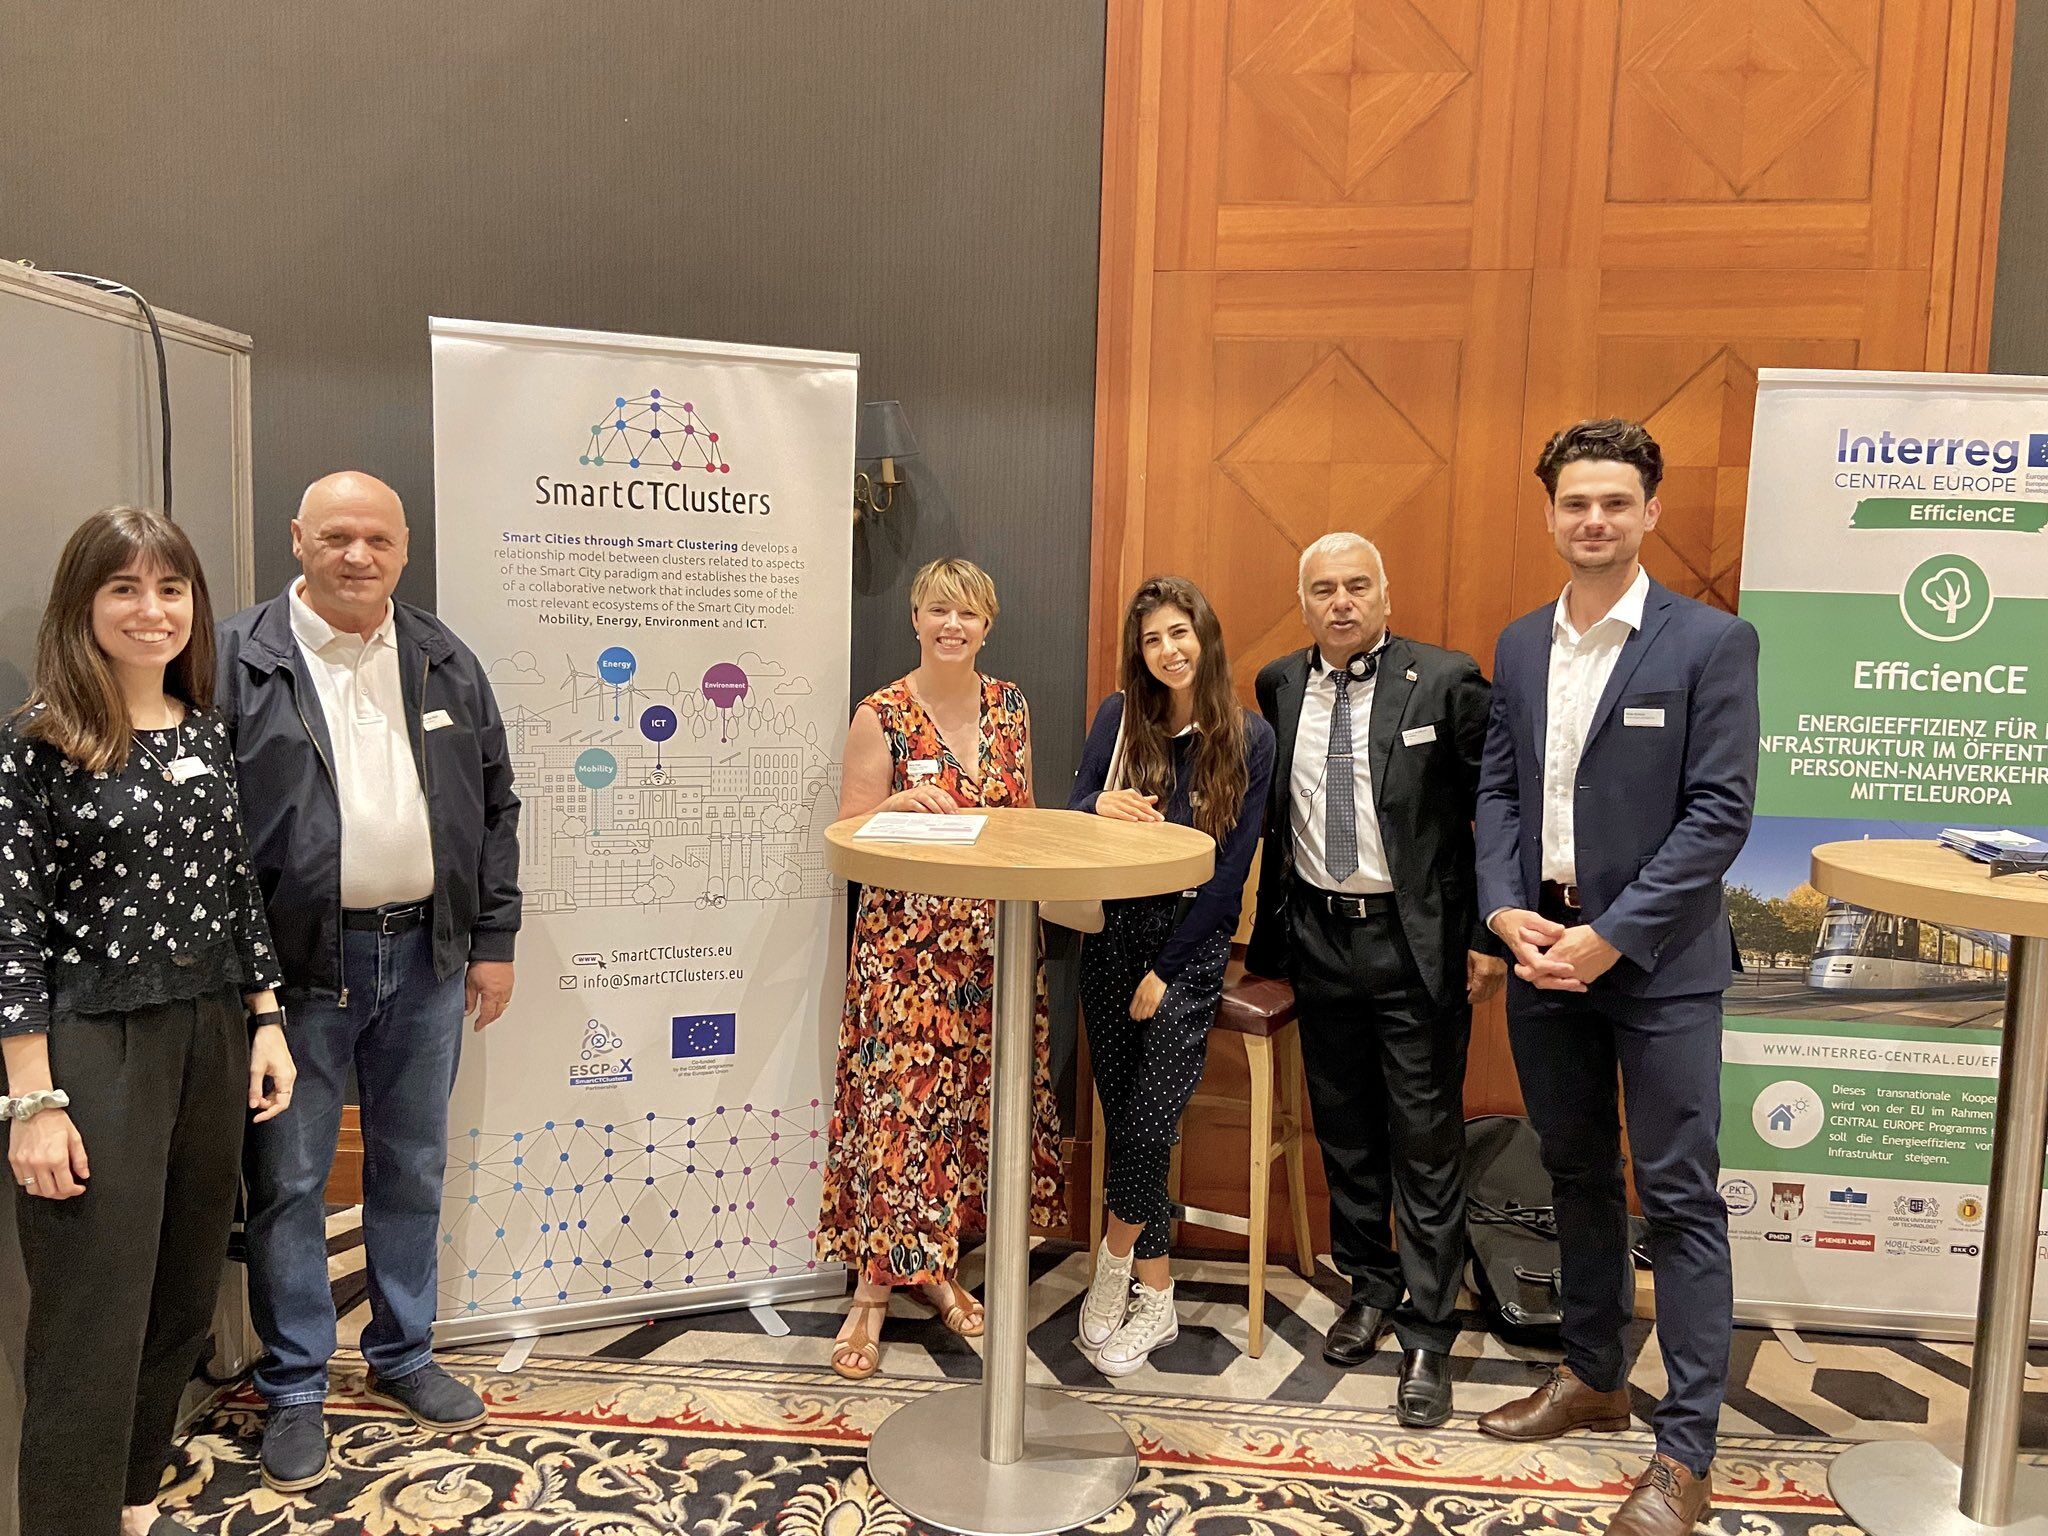 Vicomtech participated in the fifth SmartClusters exchange program in Leipzig, Germany